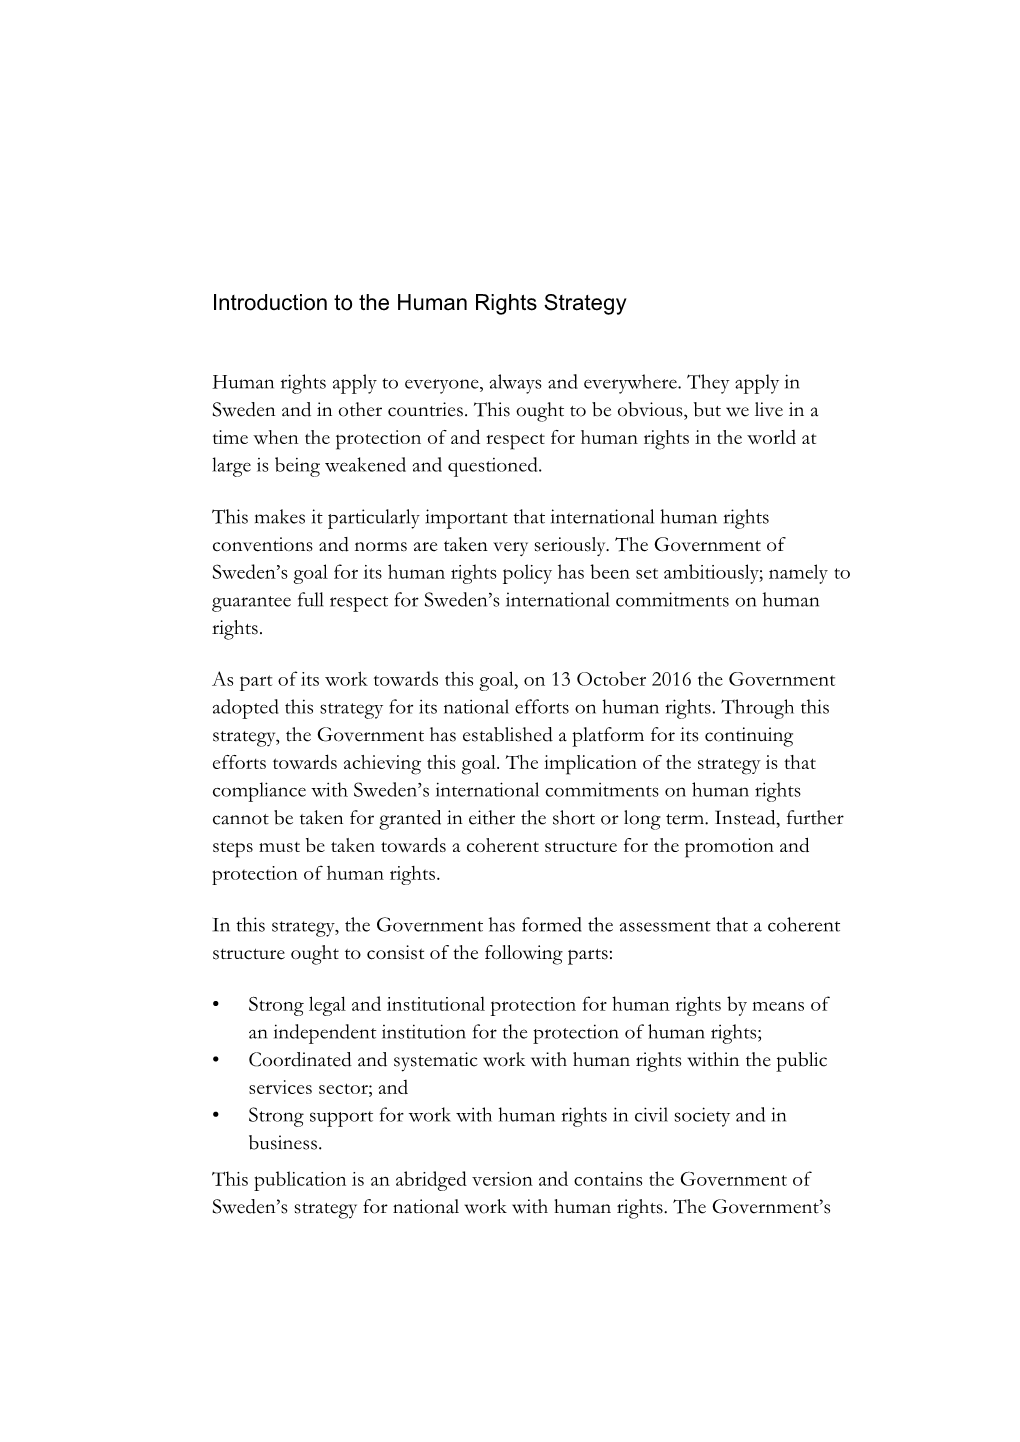 Introduction to the Human Rights Strategy